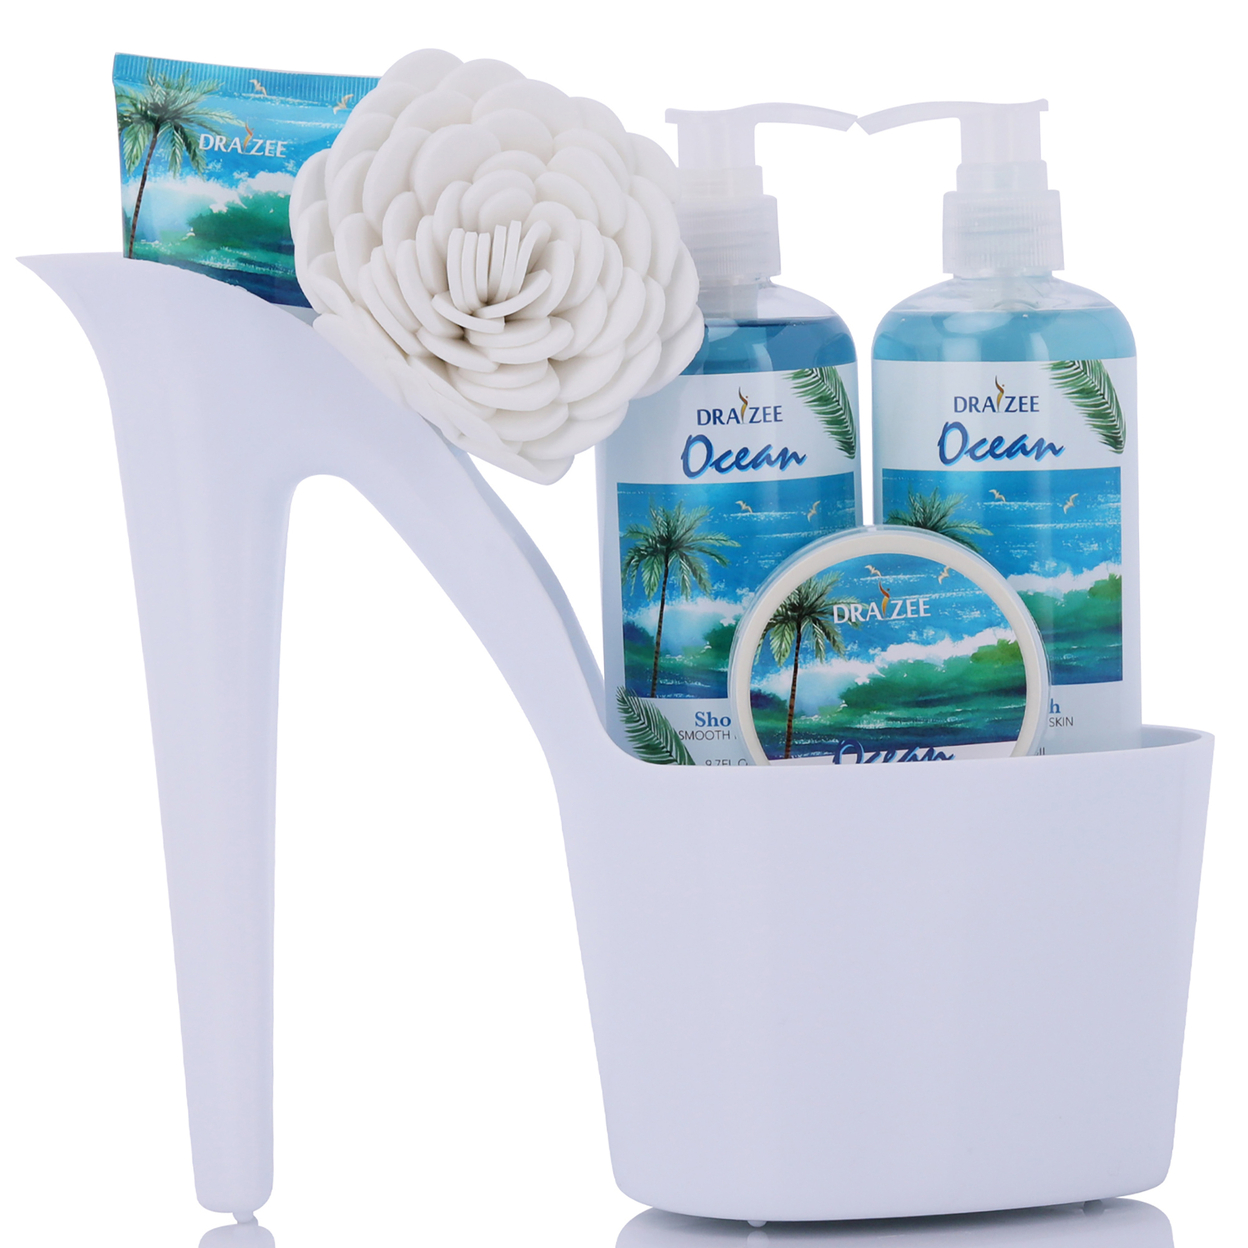 Draizee Heel Shoe Spa Gift Set Clean Ocean Scented Bath Essentials Gift Basket With Shower Gel, Bubble Bath, Body Butter, Body Lotion